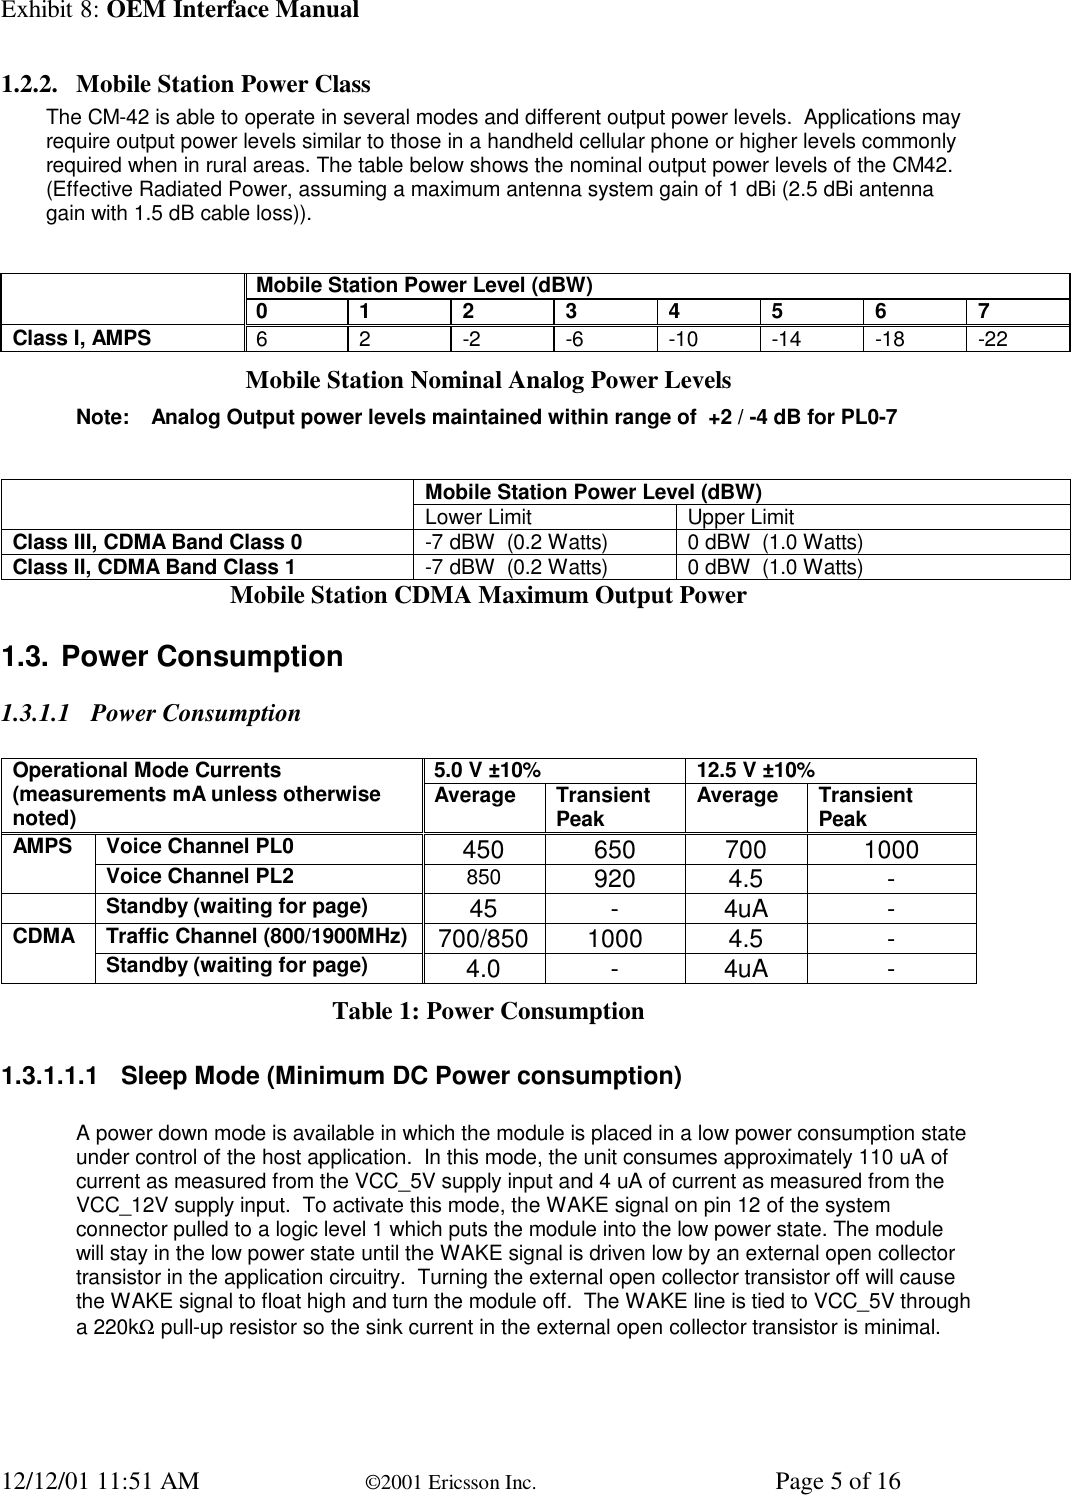 Exhibit 8: OEM Interface Manual12/12/01 11:51 AM ©2001 Ericsson Inc. Page 5 of 161.2.2. Mobile Station Power ClassThe CM-42 is able to operate in several modes and different output power levels.  Applications mayrequire output power levels similar to those in a handheld cellular phone or higher levels commonlyrequired when in rural areas. The table below shows the nominal output power levels of the CM42.(Effective Radiated Power, assuming a maximum antenna system gain of 1 dBi (2.5 dBi antennagain with 1.5 dB cable loss)).Mobile Station Power Level (dBW)01234567Class I, AMPS 6 2 -2 -6 -10 -14 -18 -22Mobile Station Nominal Analog Power LevelsNote: Analog Output power levels maintained within range of  +2 / -4 dB for PL0-7Mobile Station Power Level (dBW)Lower Limit Upper LimitClass III, CDMA Band Class 0 -7 dBW  (0.2 Watts) 0 dBW  (1.0 Watts)Class II, CDMA Band Class 1 -7 dBW  (0.2 Watts) 0 dBW  (1.0 Watts)Mobile Station CDMA Maximum Output Power1.3. Power Consumption1.3.1.1 Power Consumption5.0 V ±10% 12.5 V ±10%Operational Mode Currents(measurements mA unless otherwisenoted) Average TransientPeak Average TransientPeakVoice Channel PL0 450 650 700 1000AMPSVoice Channel PL2 850 920 4.5 -Standby (waiting for page) 45 -4uA -Traffic Channel (800/1900MHz) 700/850 1000 4.5 -CDMAStandby (waiting for page) 4.0 -4uA -Table 1: Power Consumption1.3.1.1.1 Sleep Mode (Minimum DC Power consumption)A power down mode is available in which the module is placed in a low power consumption stateunder control of the host application.  In this mode, the unit consumes approximately 110 uA ofcurrent as measured from the VCC_5V supply input and 4 uA of current as measured from theVCC_12V supply input.  To activate this mode, the WAKE signal on pin 12 of the systemconnector pulled to a logic level 1 which puts the module into the low power state. The modulewill stay in the low power state until the WAKE signal is driven low by an external open collectortransistor in the application circuitry.  Turning the external open collector transistor off will causethe WAKE signal to float high and turn the module off.  The WAKE line is tied to VCC_5V througha 220kΩ pull-up resistor so the sink current in the external open collector transistor is minimal.